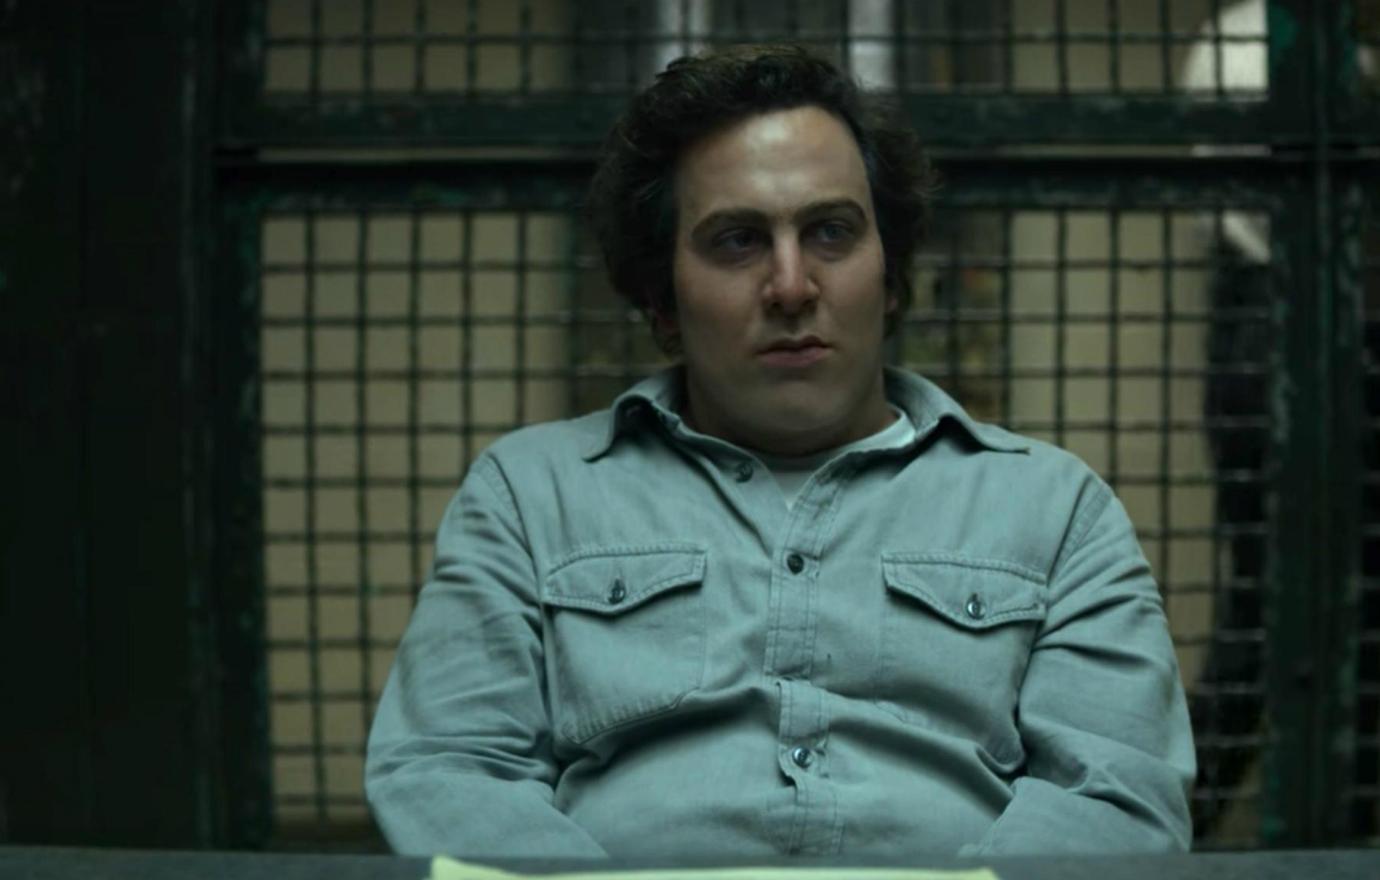 Mindhunter': How the Real Serial Killers Compare to Show's Versions